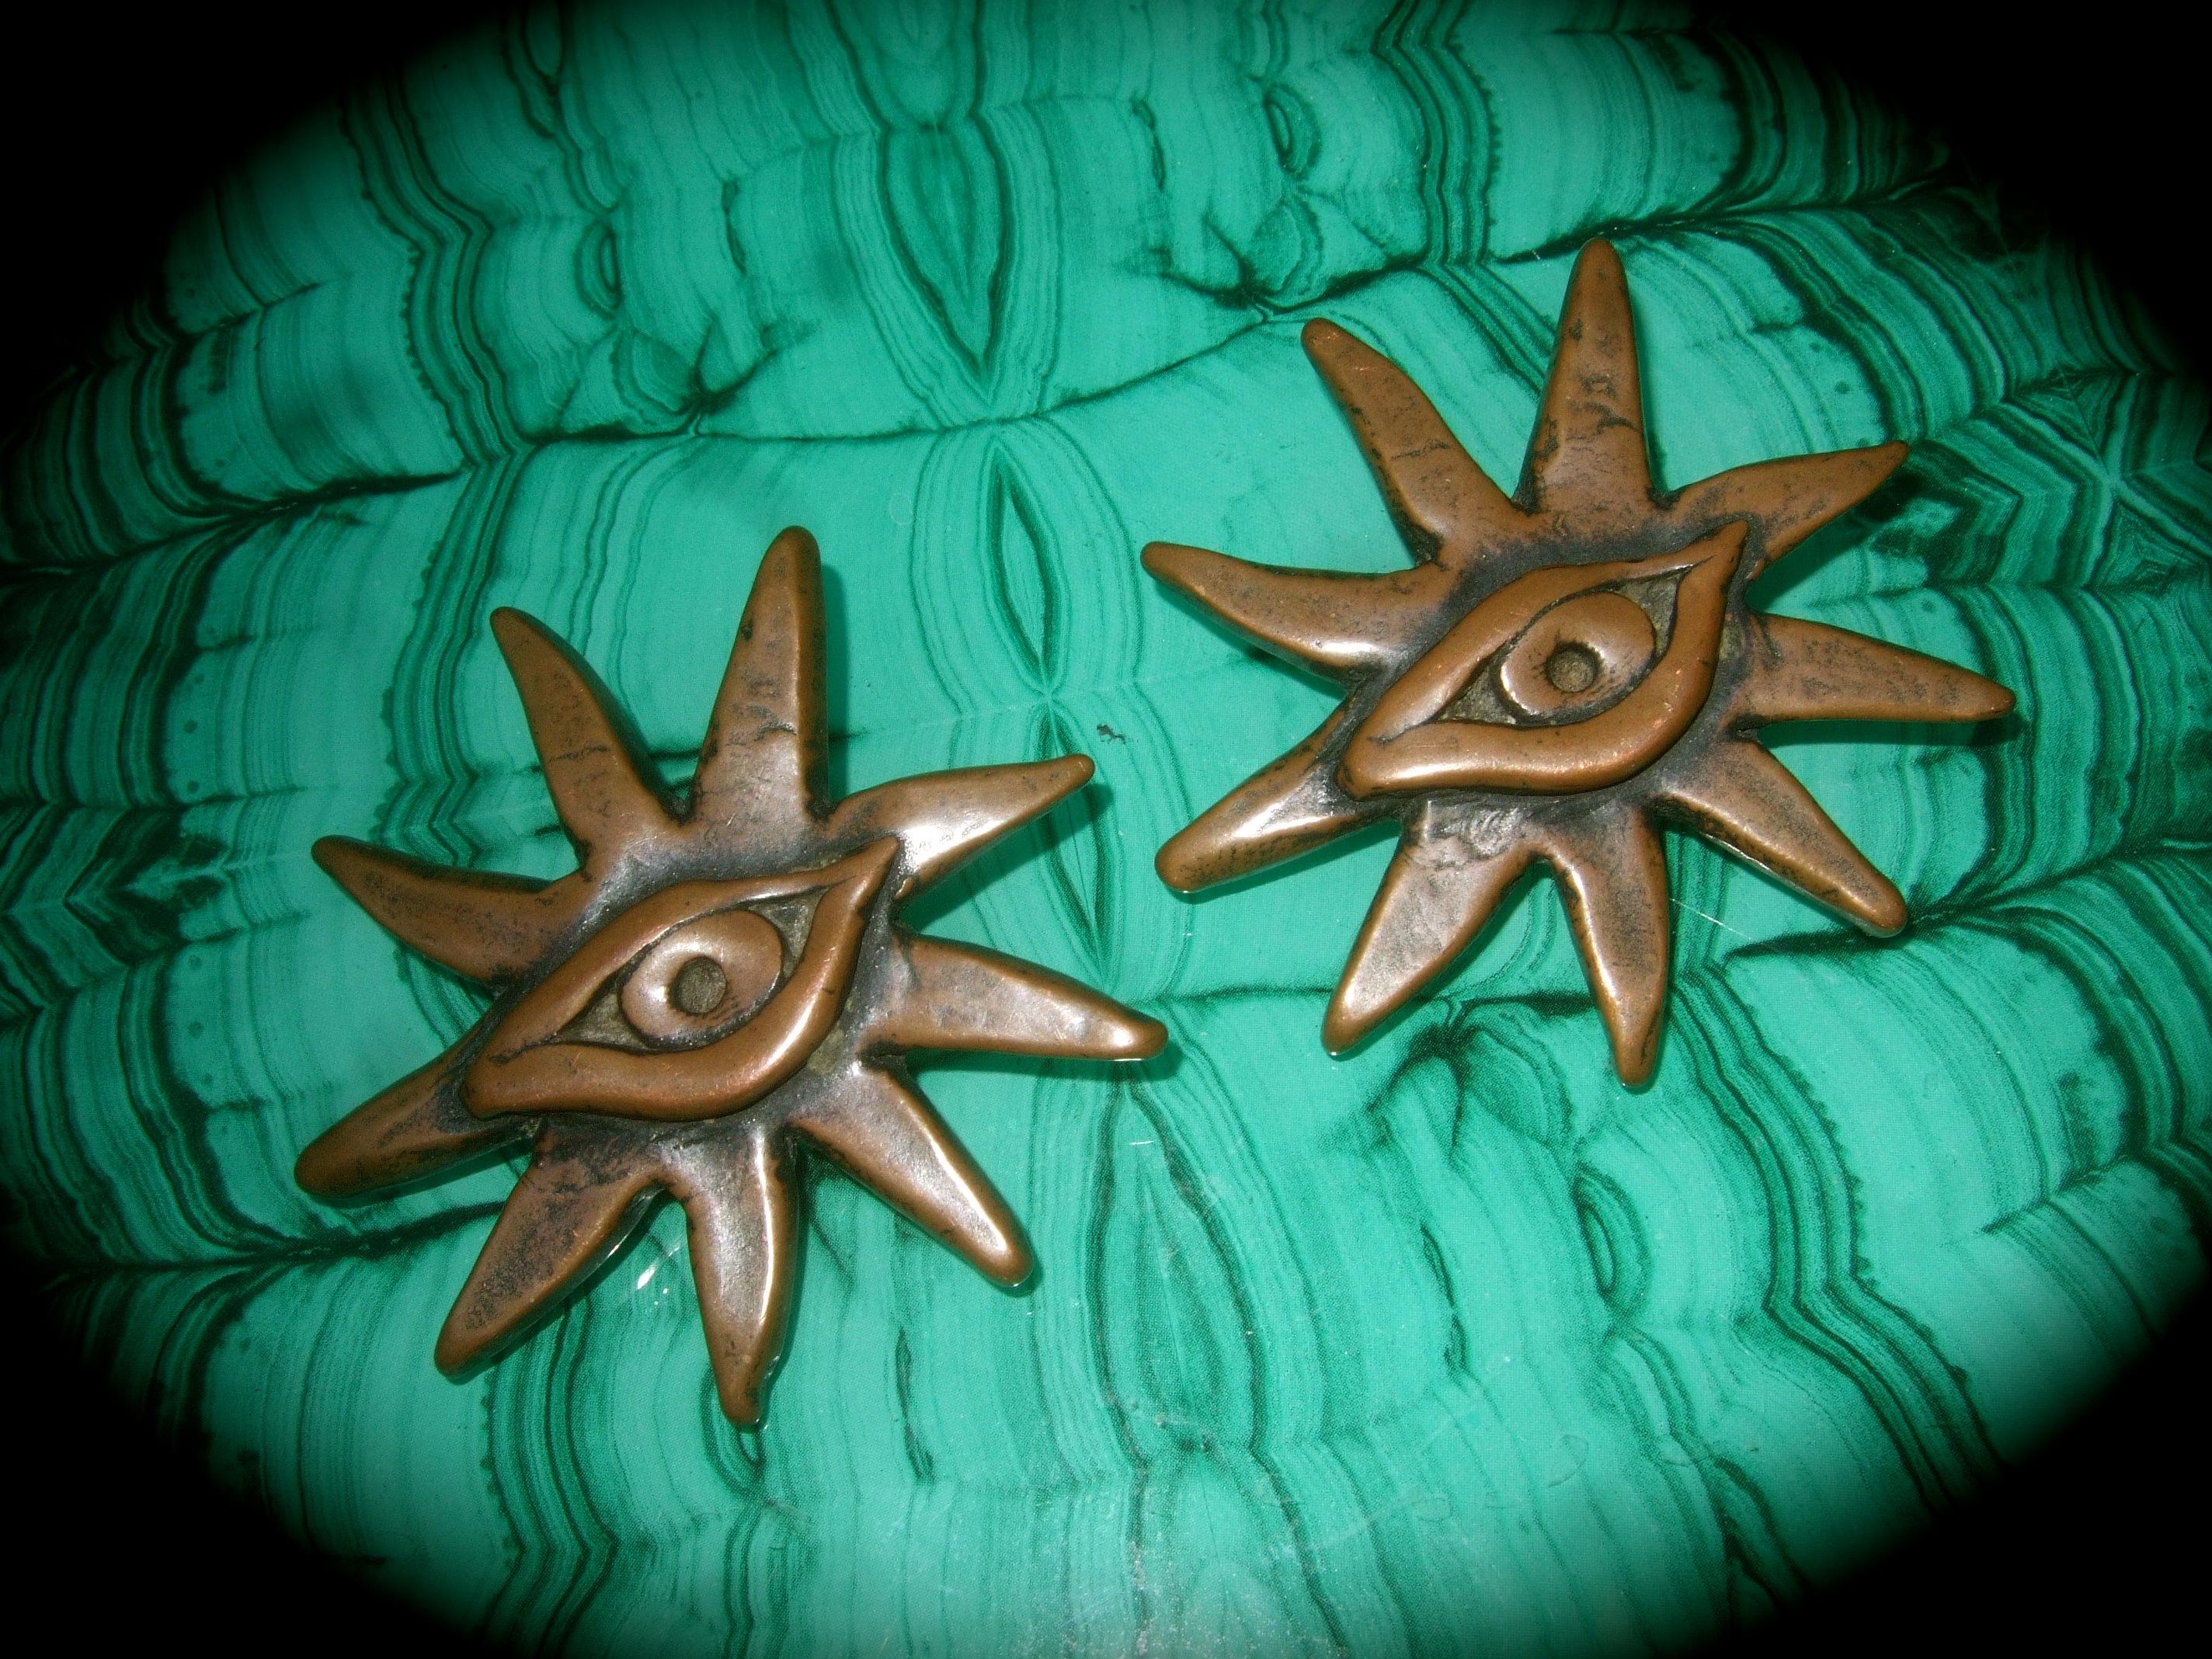 French surrealist bronze metal sunburst eye themed clip-on earrings designed by Scooter Paris 
The unique figural large-scale earrings are designed with radiating beams with an eye 
placed in the center 

They make a very bold, avant-garde accessory